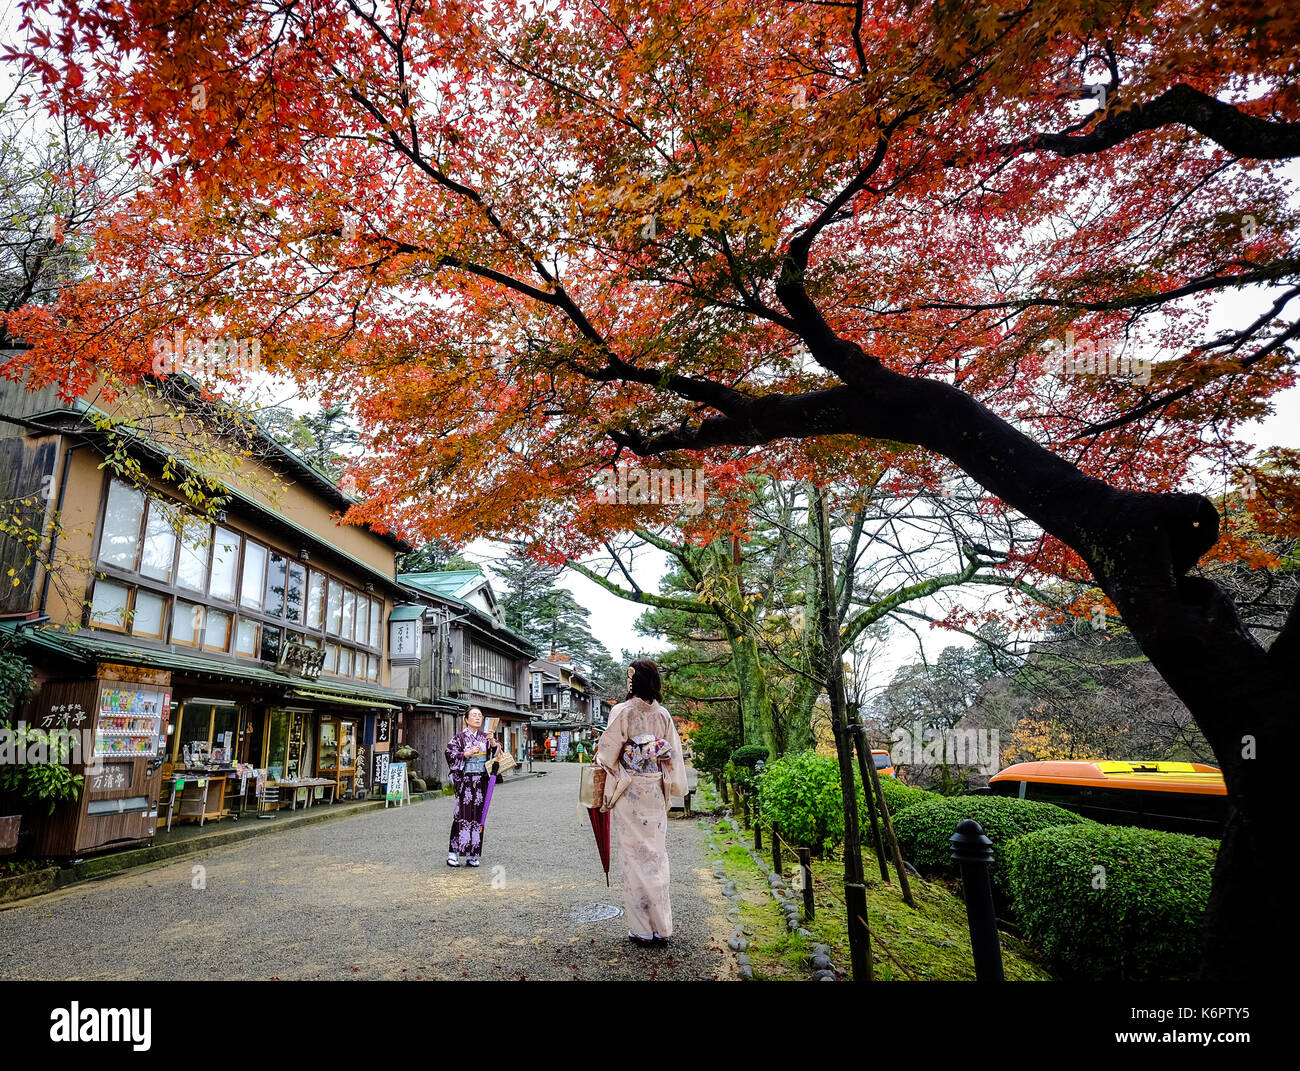 Kyoto, Japan - Nov 19, 2016. Women in kimono visit Gion Old Street at autumn in Kyoto, Japan. Kyoto served as Japan capital and the emperor residence  Stock Photo